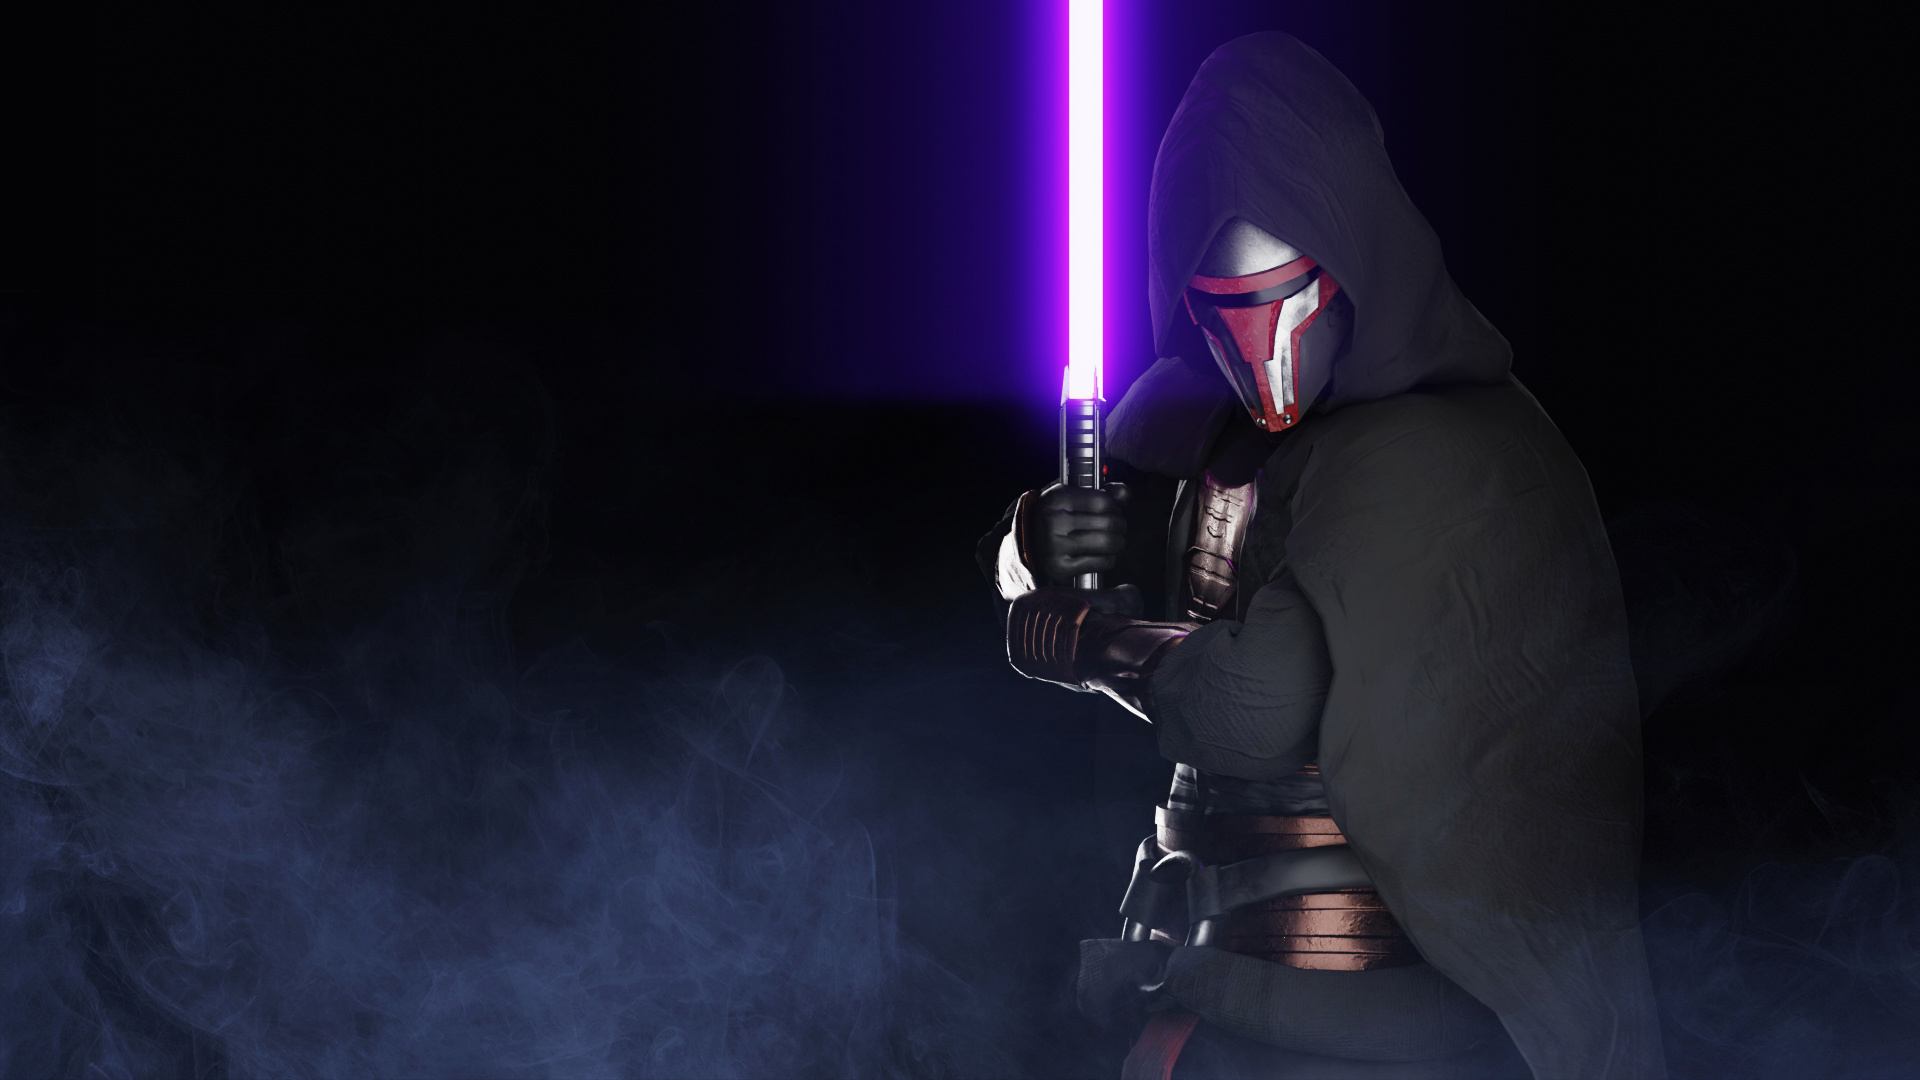 Darth Revan: Was betrayed by Malak and was captured by the Jedi Knight Bastila Shan. 1920x1080 Full HD Background.